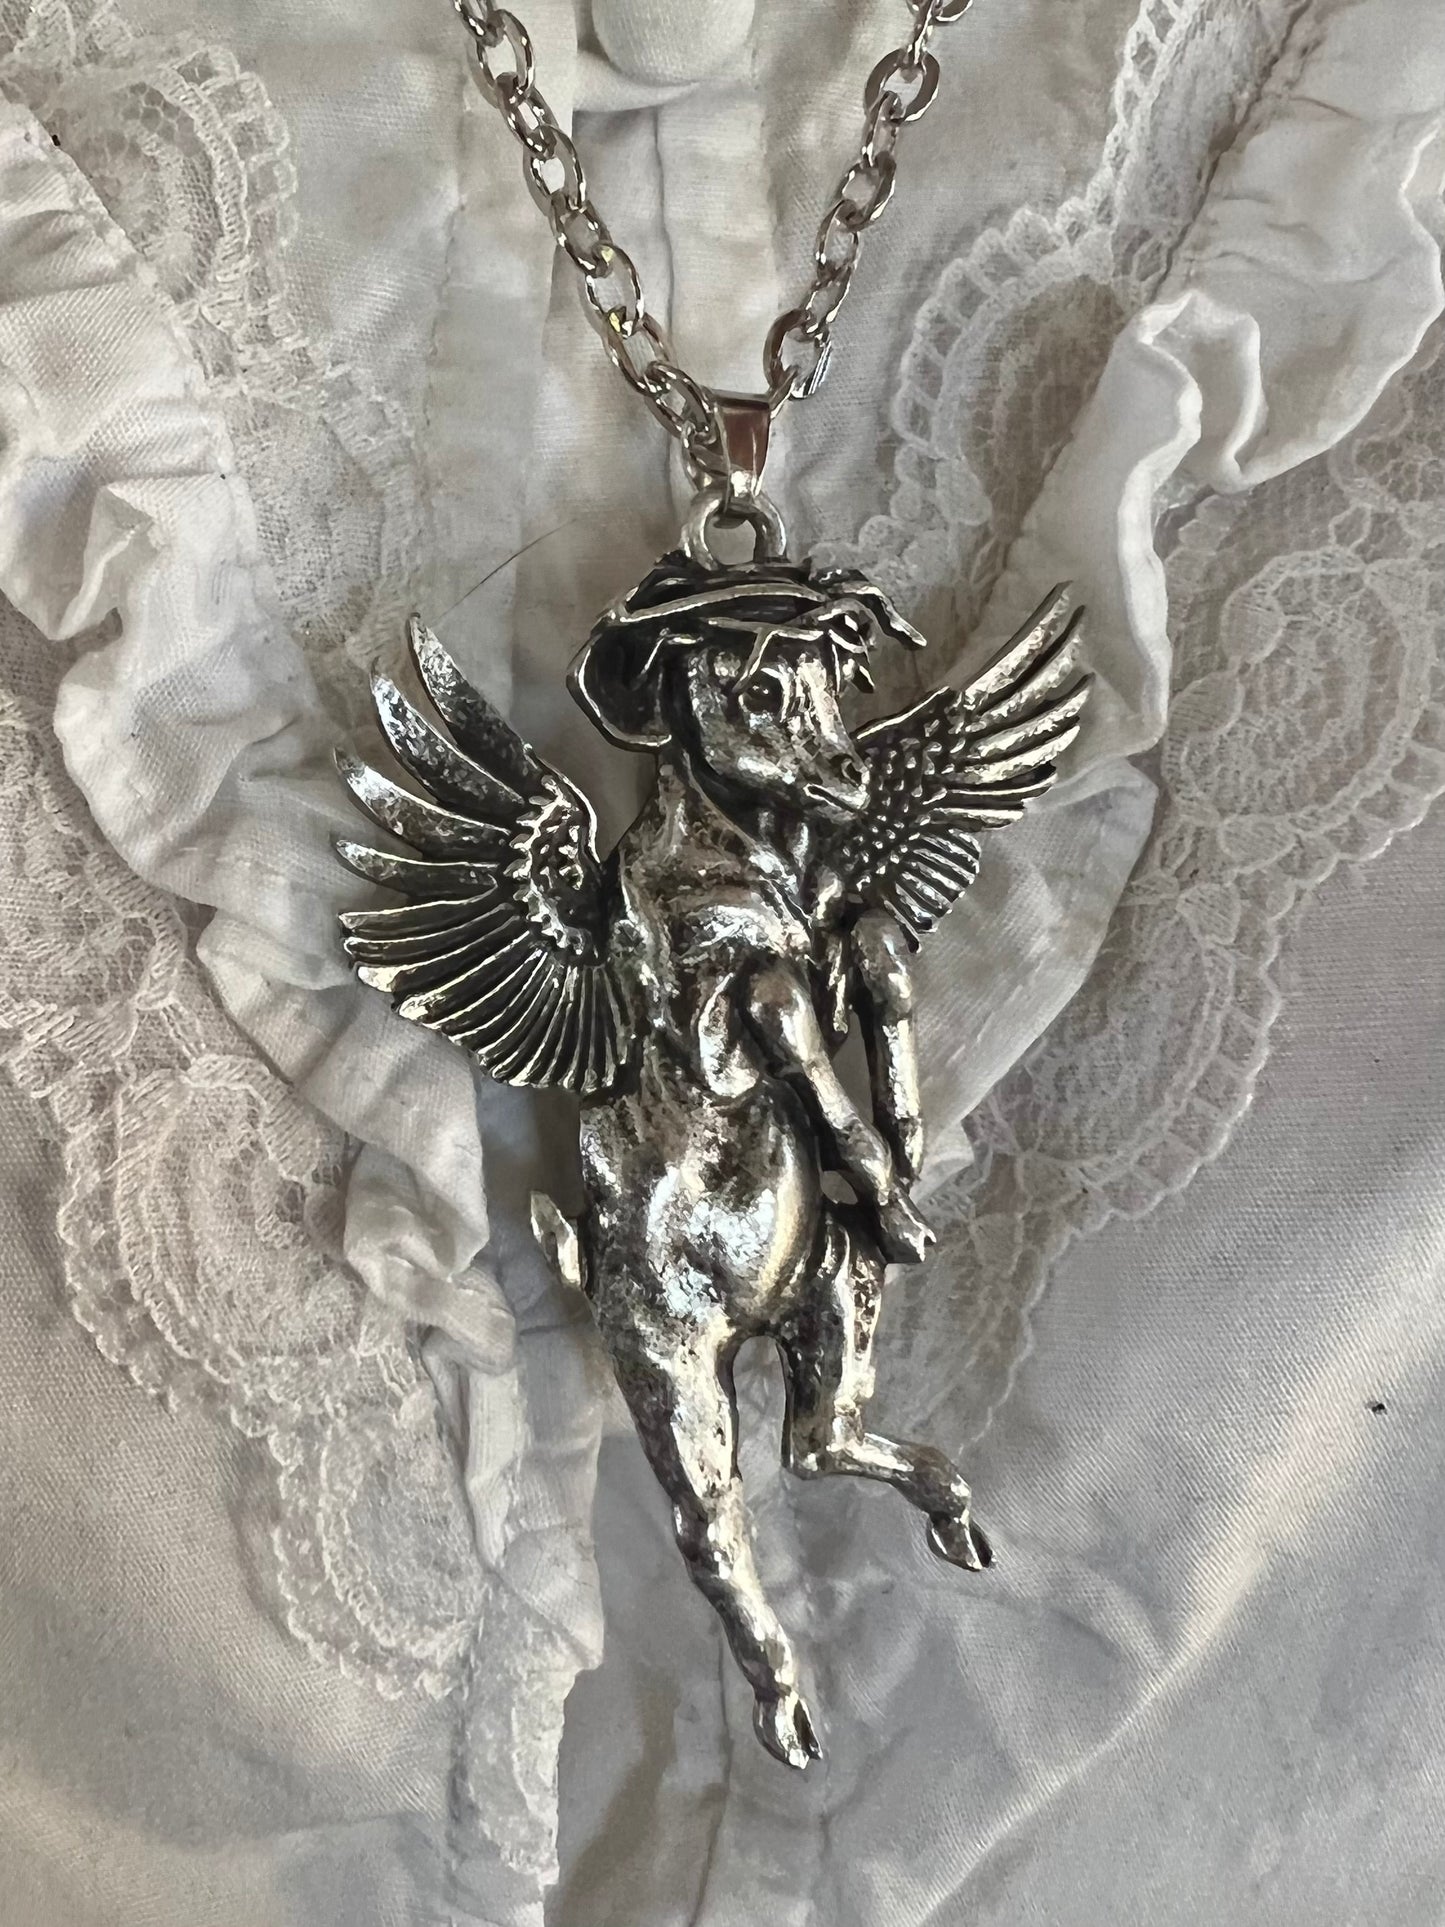 HEAVENLY BODY - Mother of Hades Cast Necklace